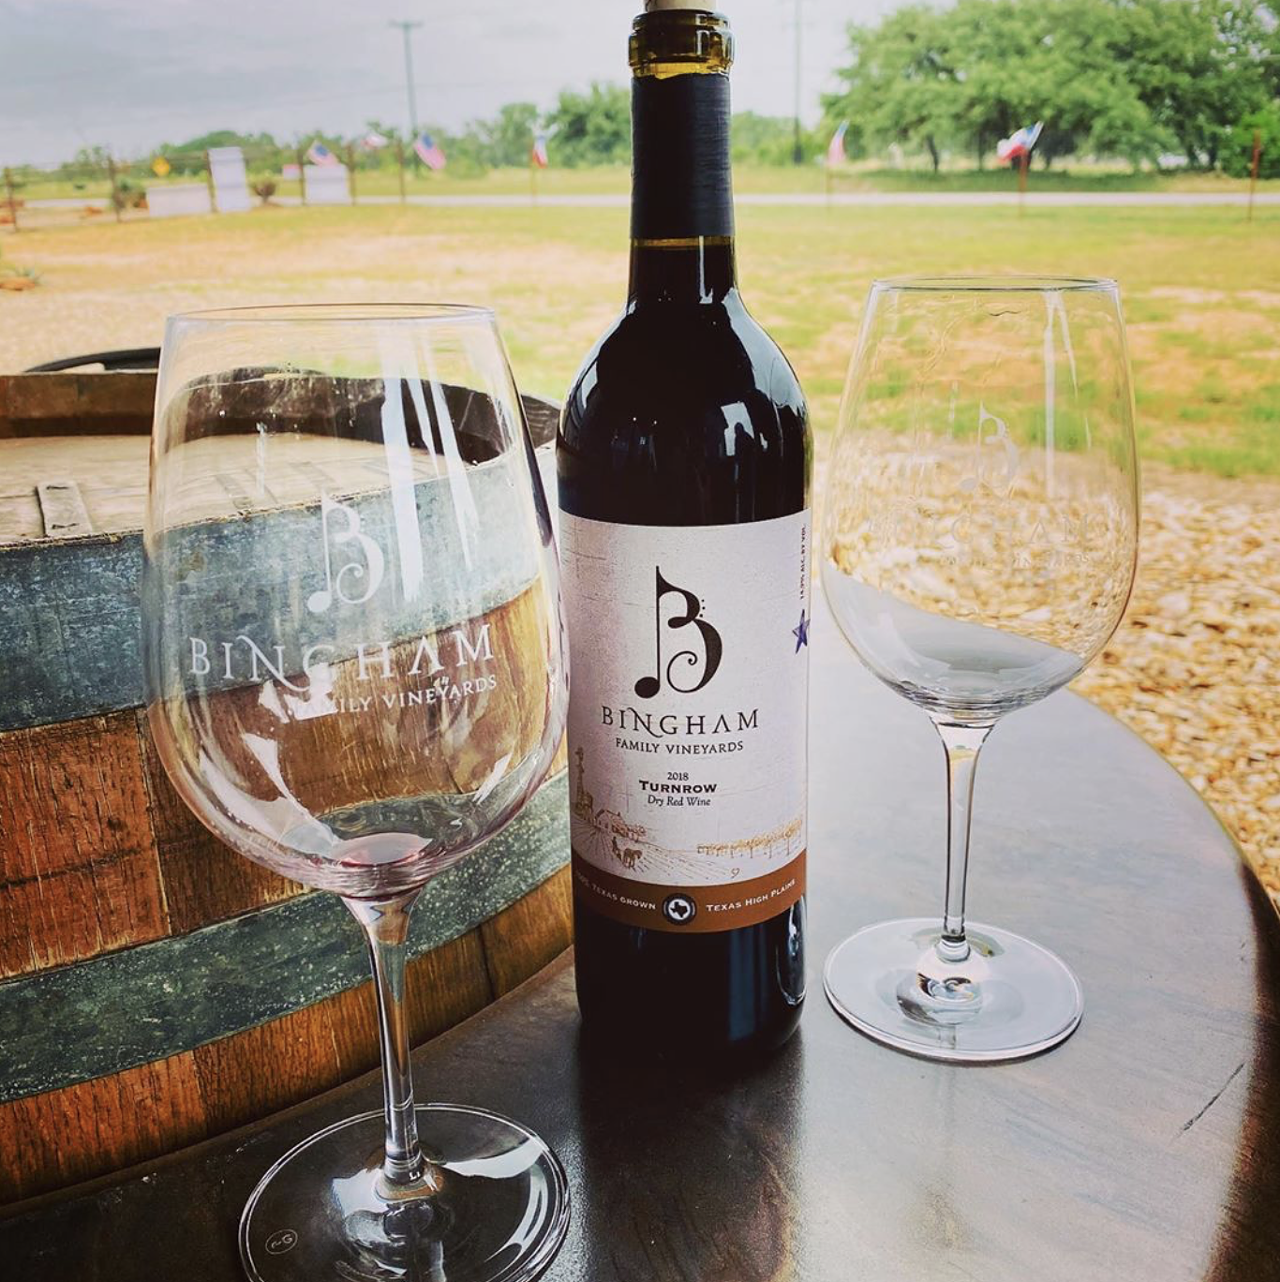 Bingham Family Vineyards
3915 B, US-290 E, Fredericksburg, TX, (830) 304-6616, binghamfamilyvineyards.comThis quaint Fredericksburg winery offers sprawling Hill Country views, cheese, charcuterie and — of course — amazing Texas wine. Grab a bottle and post up at an outdoor table for a relaxing weekend afternoon.
Photo via Instagram / foodboardsandbars